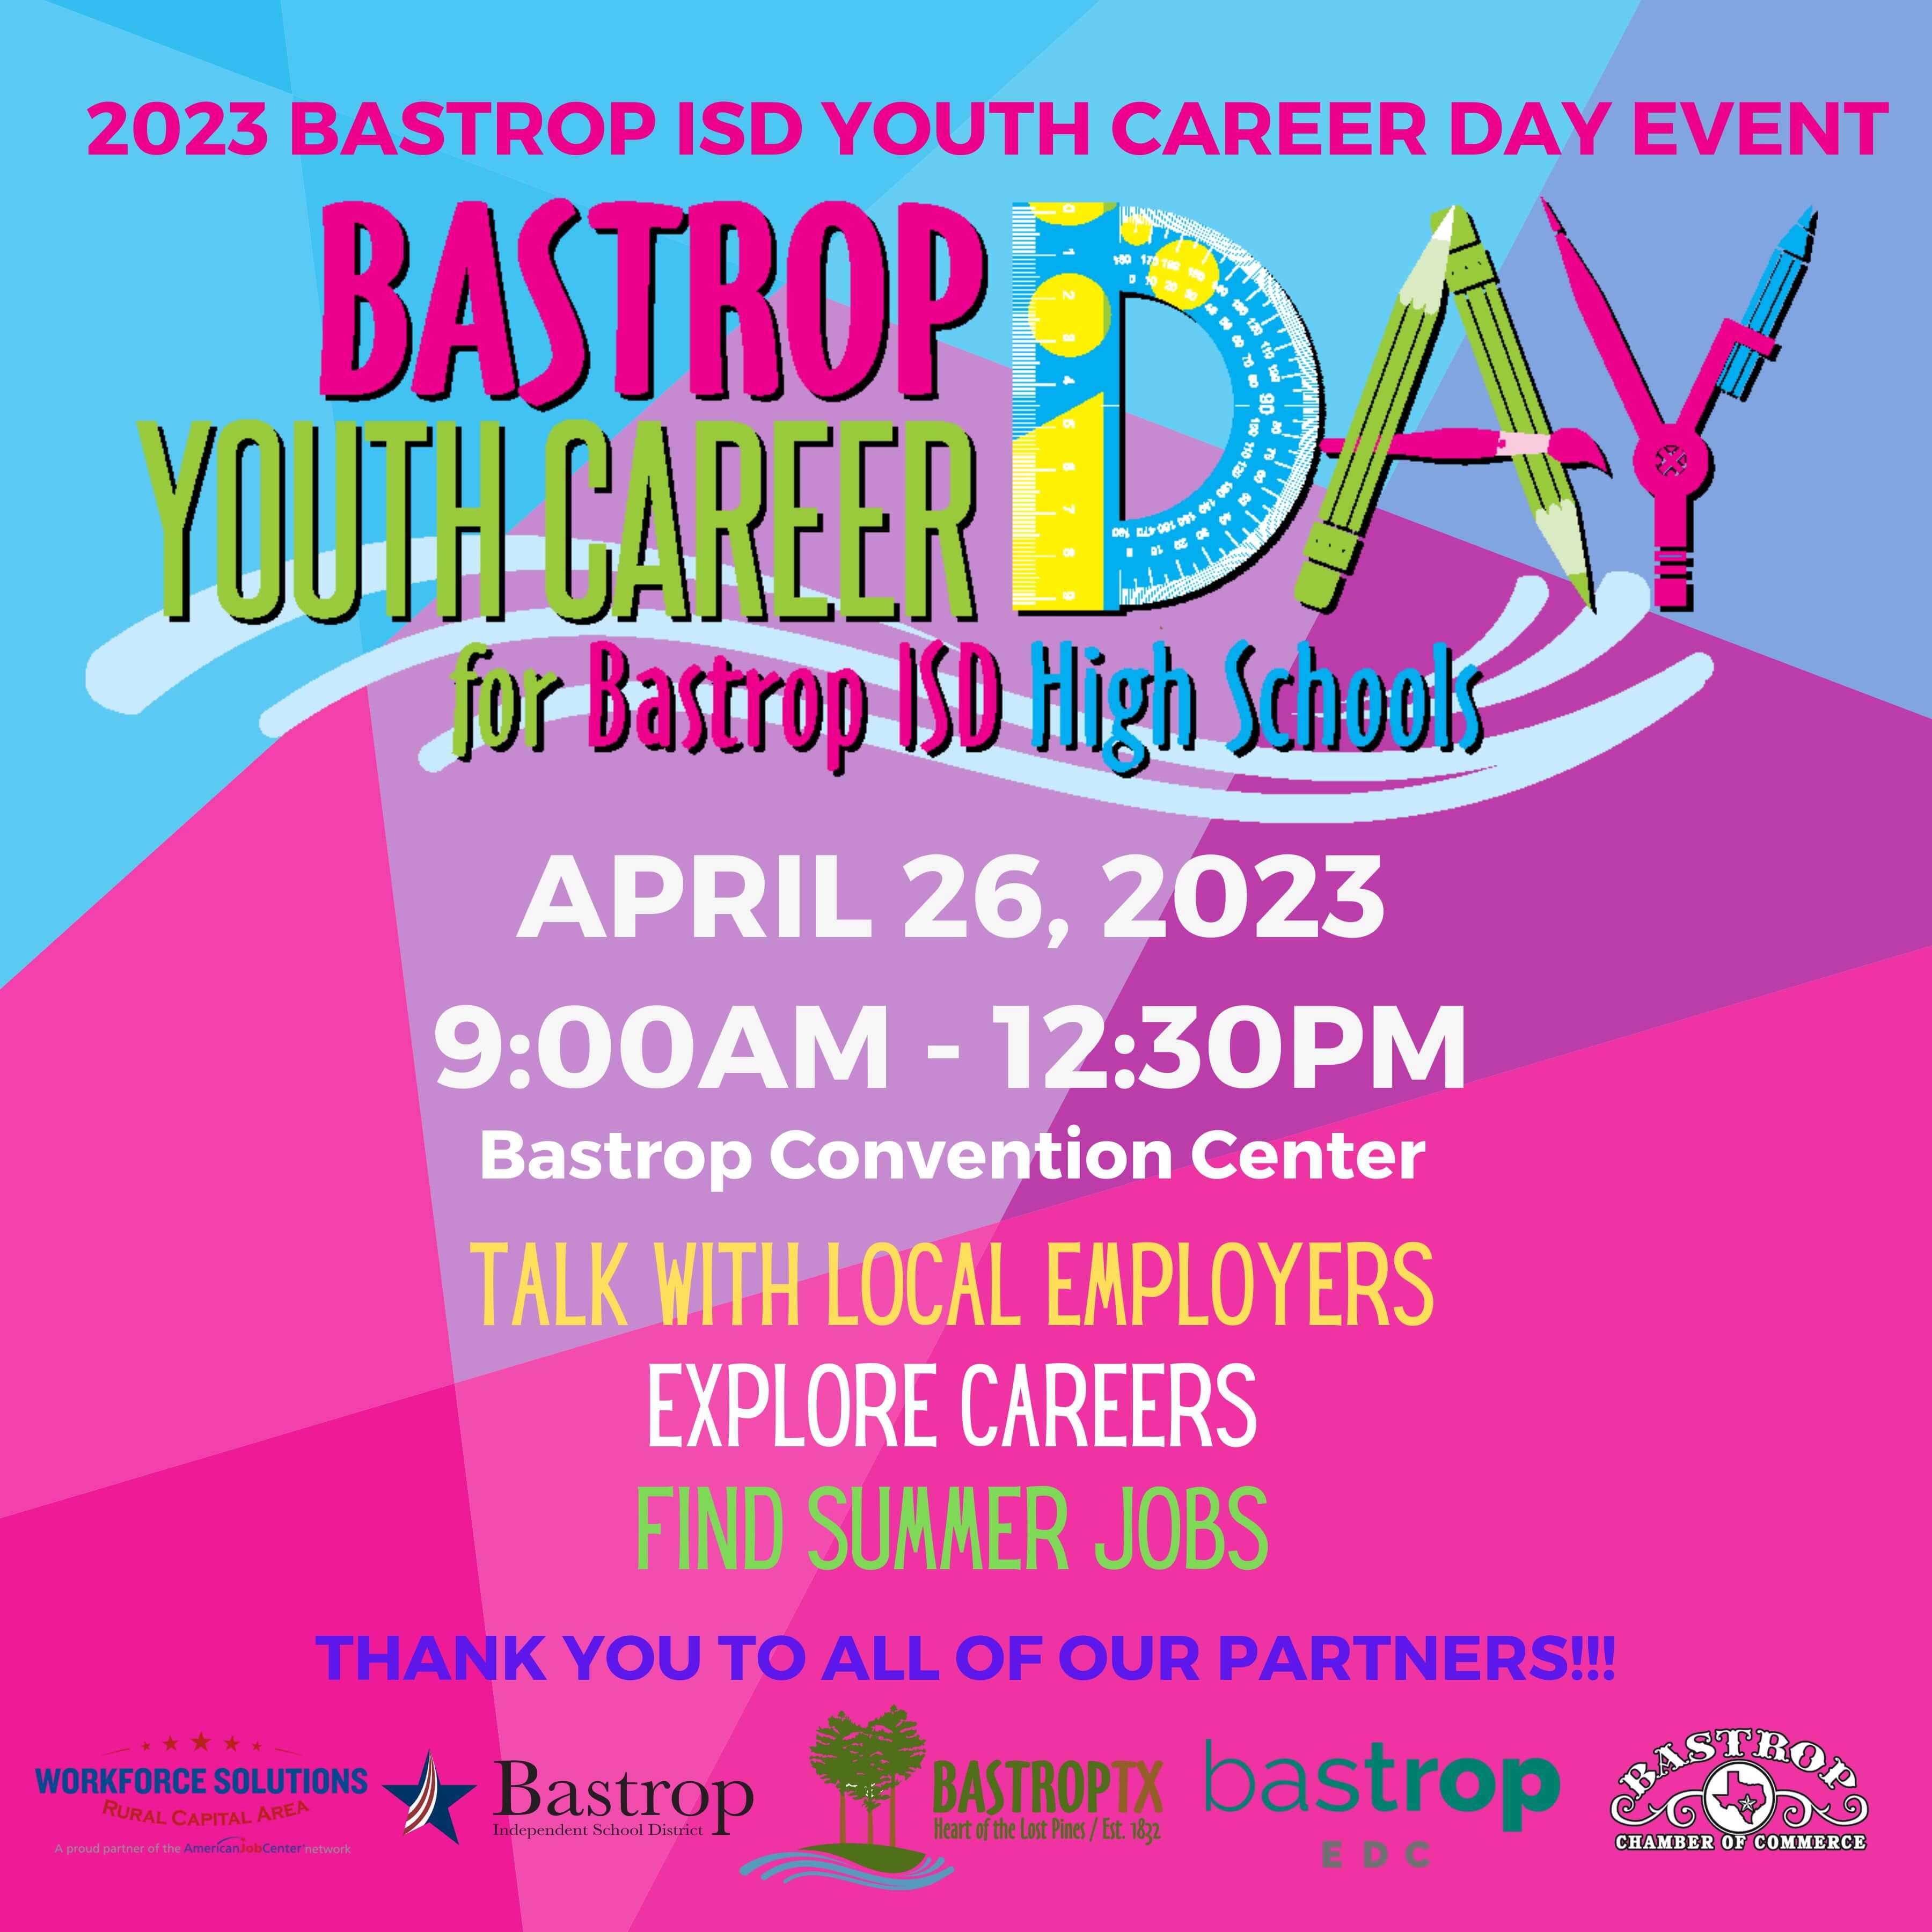 2023 Bastrop ISD YOUTH CAREER DAY EVENT (1)